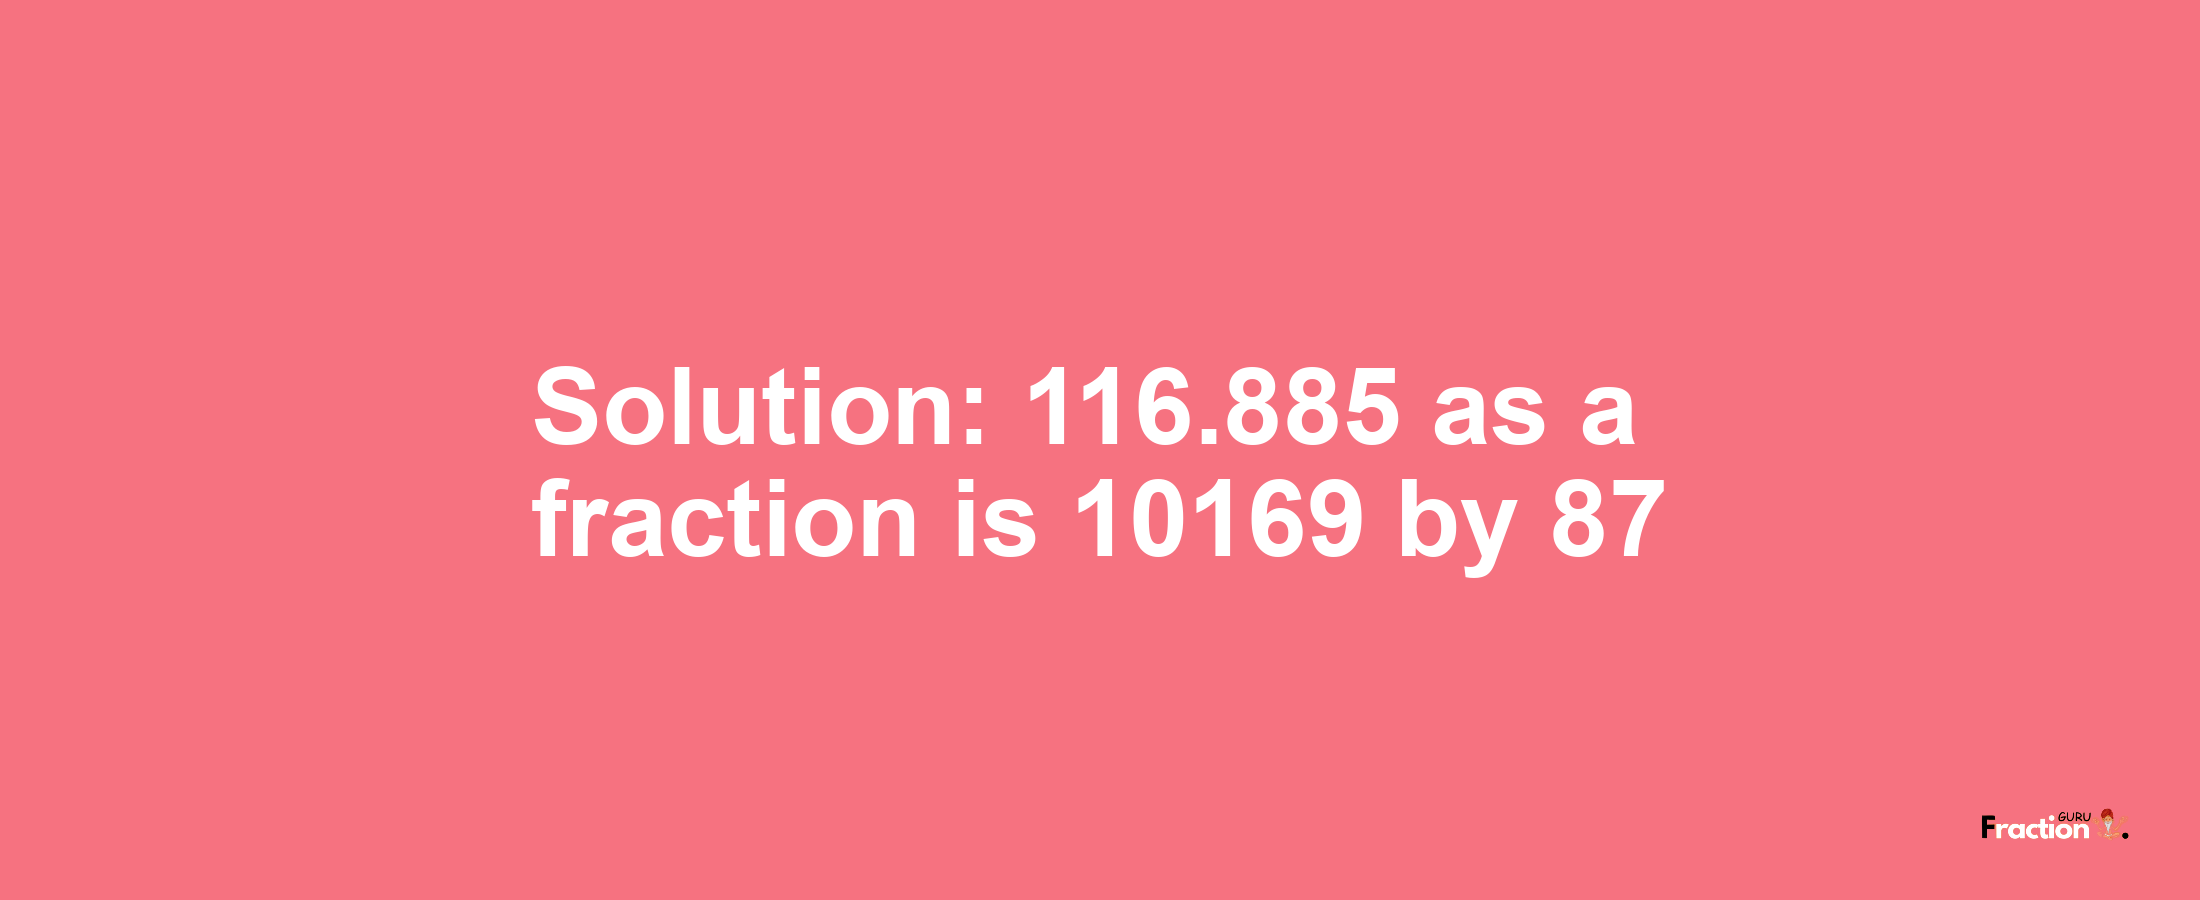 Solution:116.885 as a fraction is 10169/87